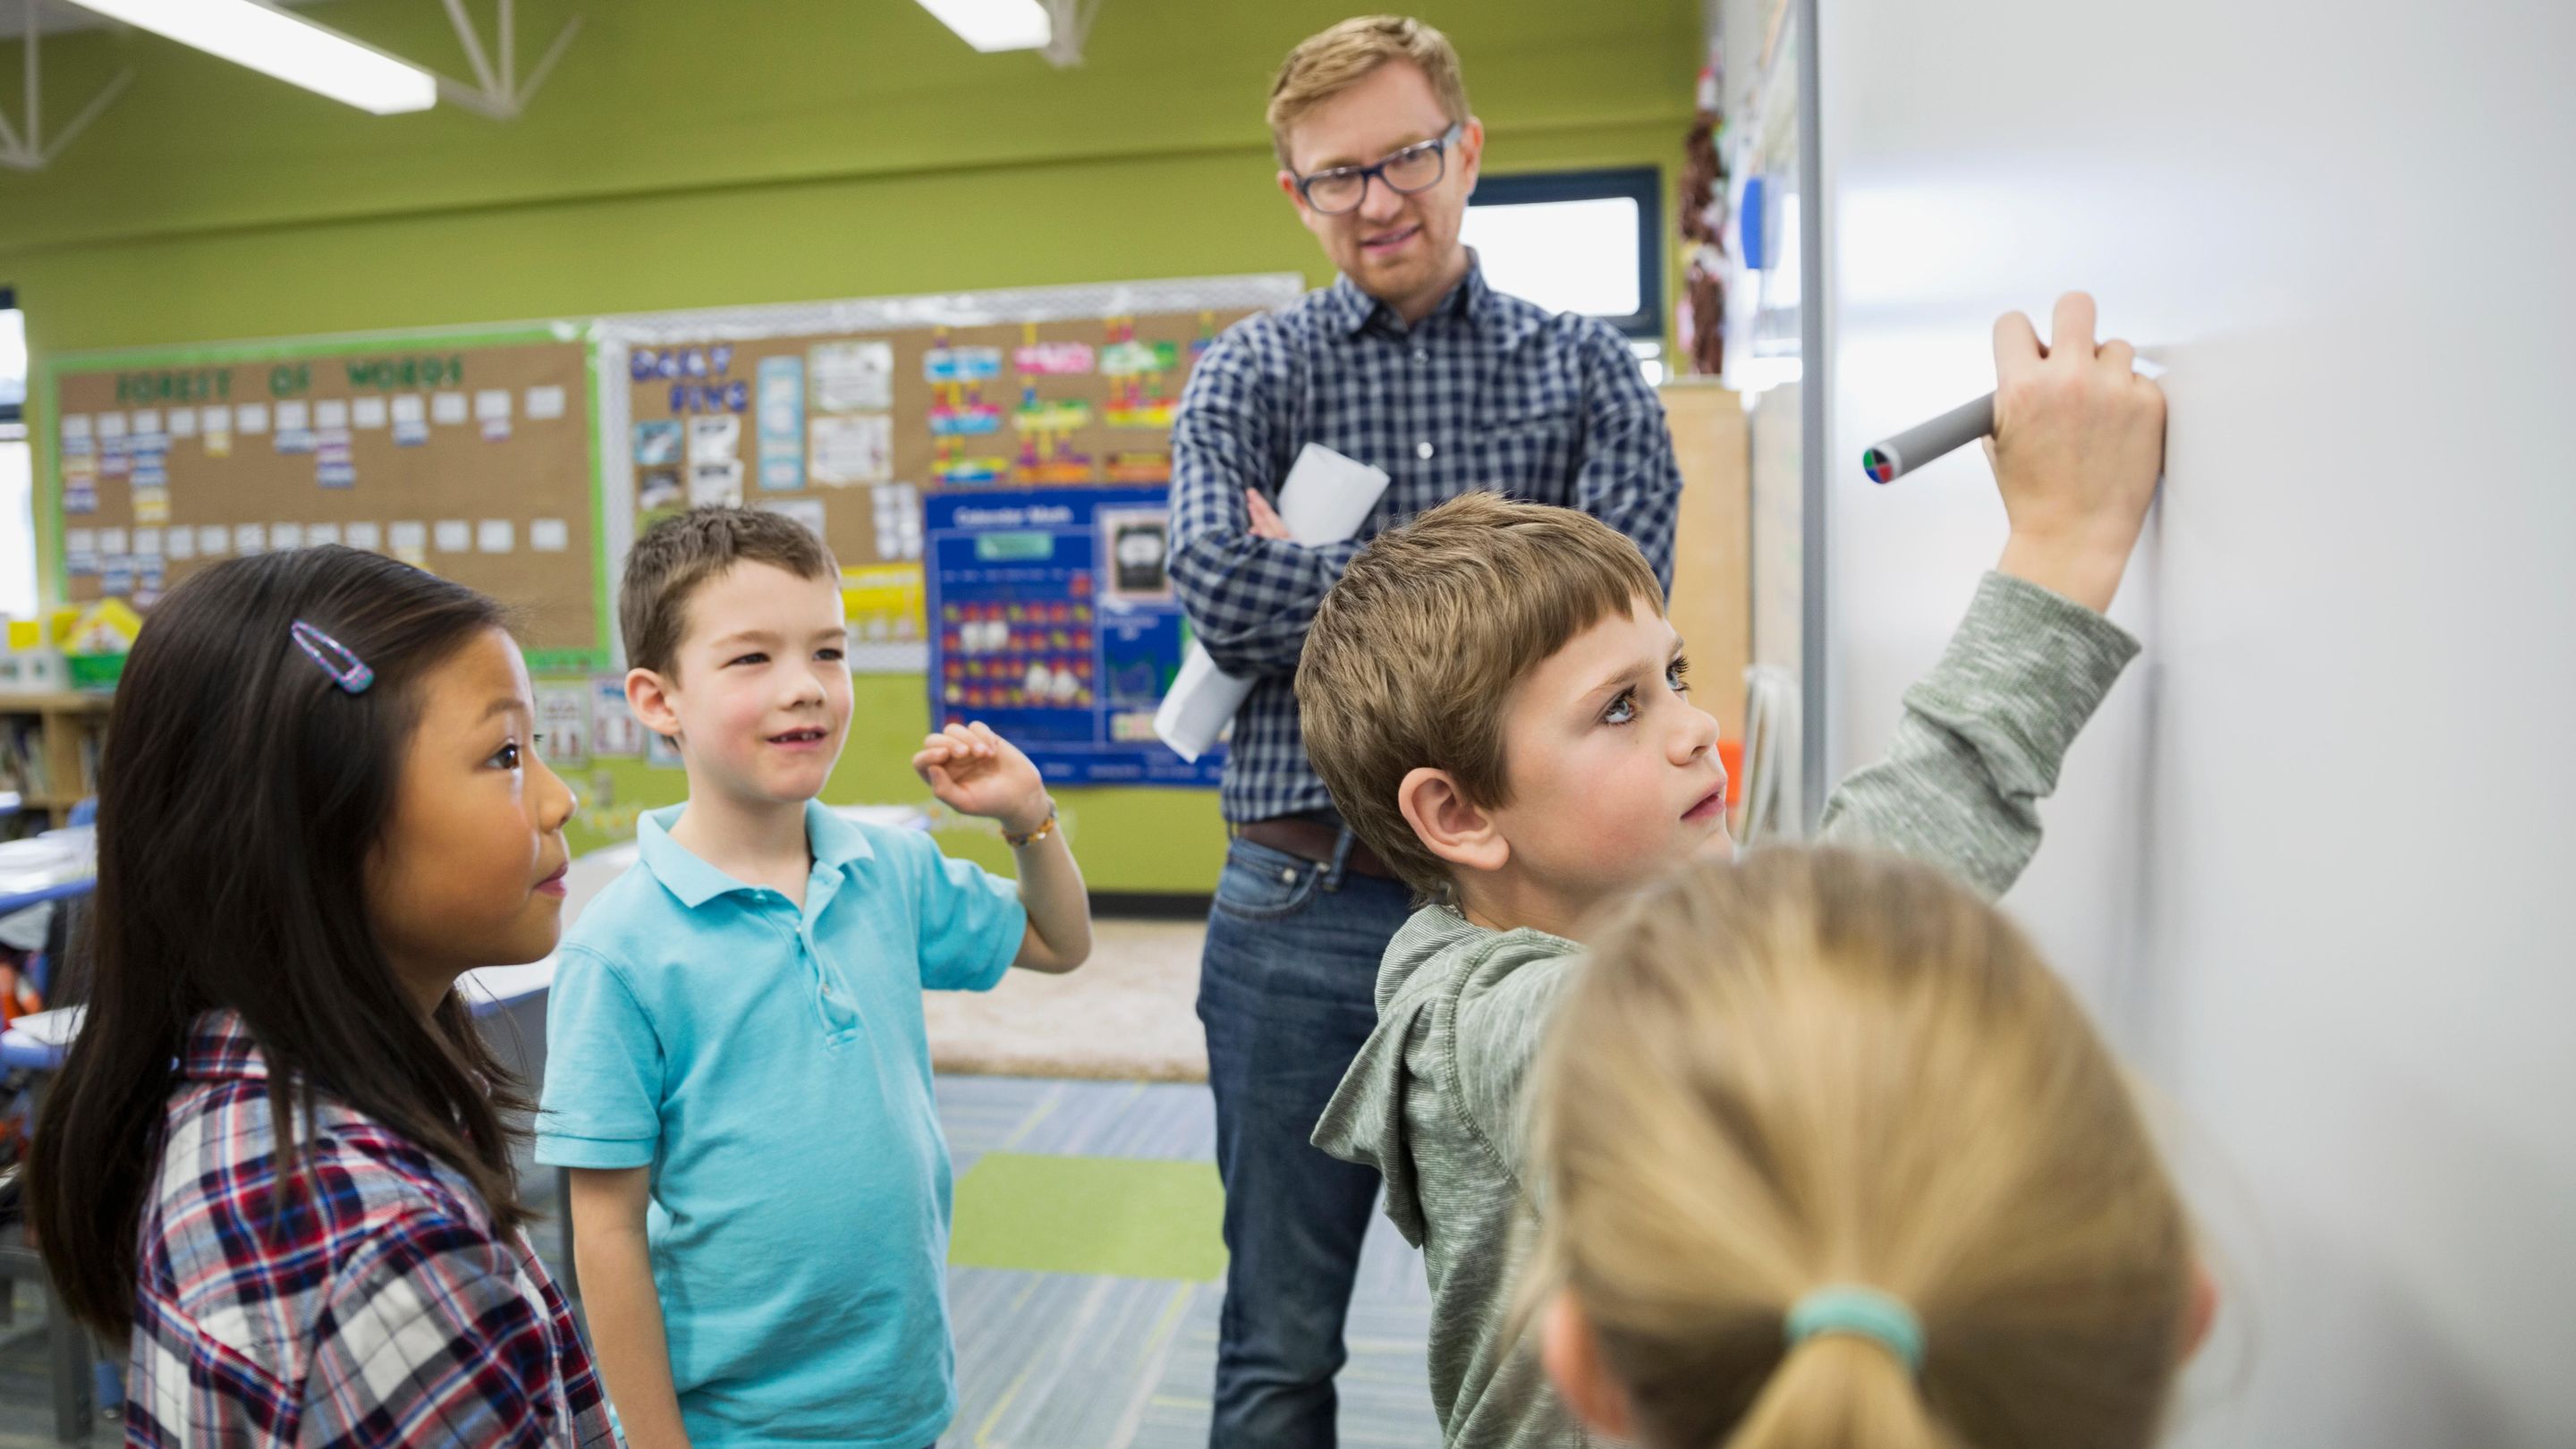 3 Ways to Ask Questions That Engage the Whole Class